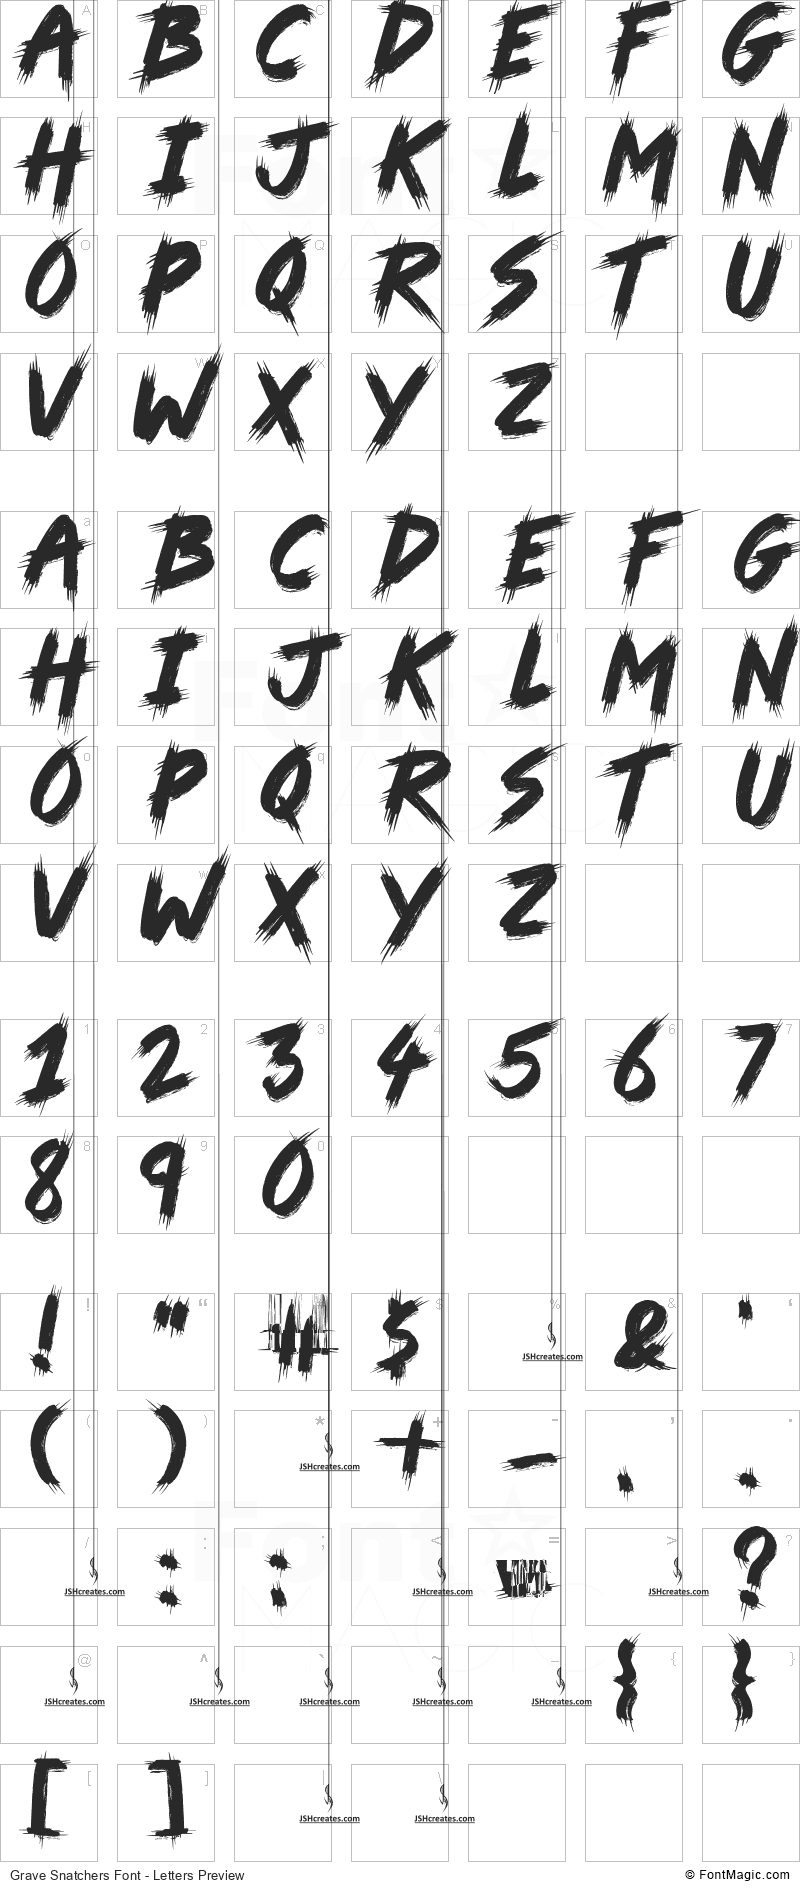 Grave Snatchers Font - All Latters Preview Chart